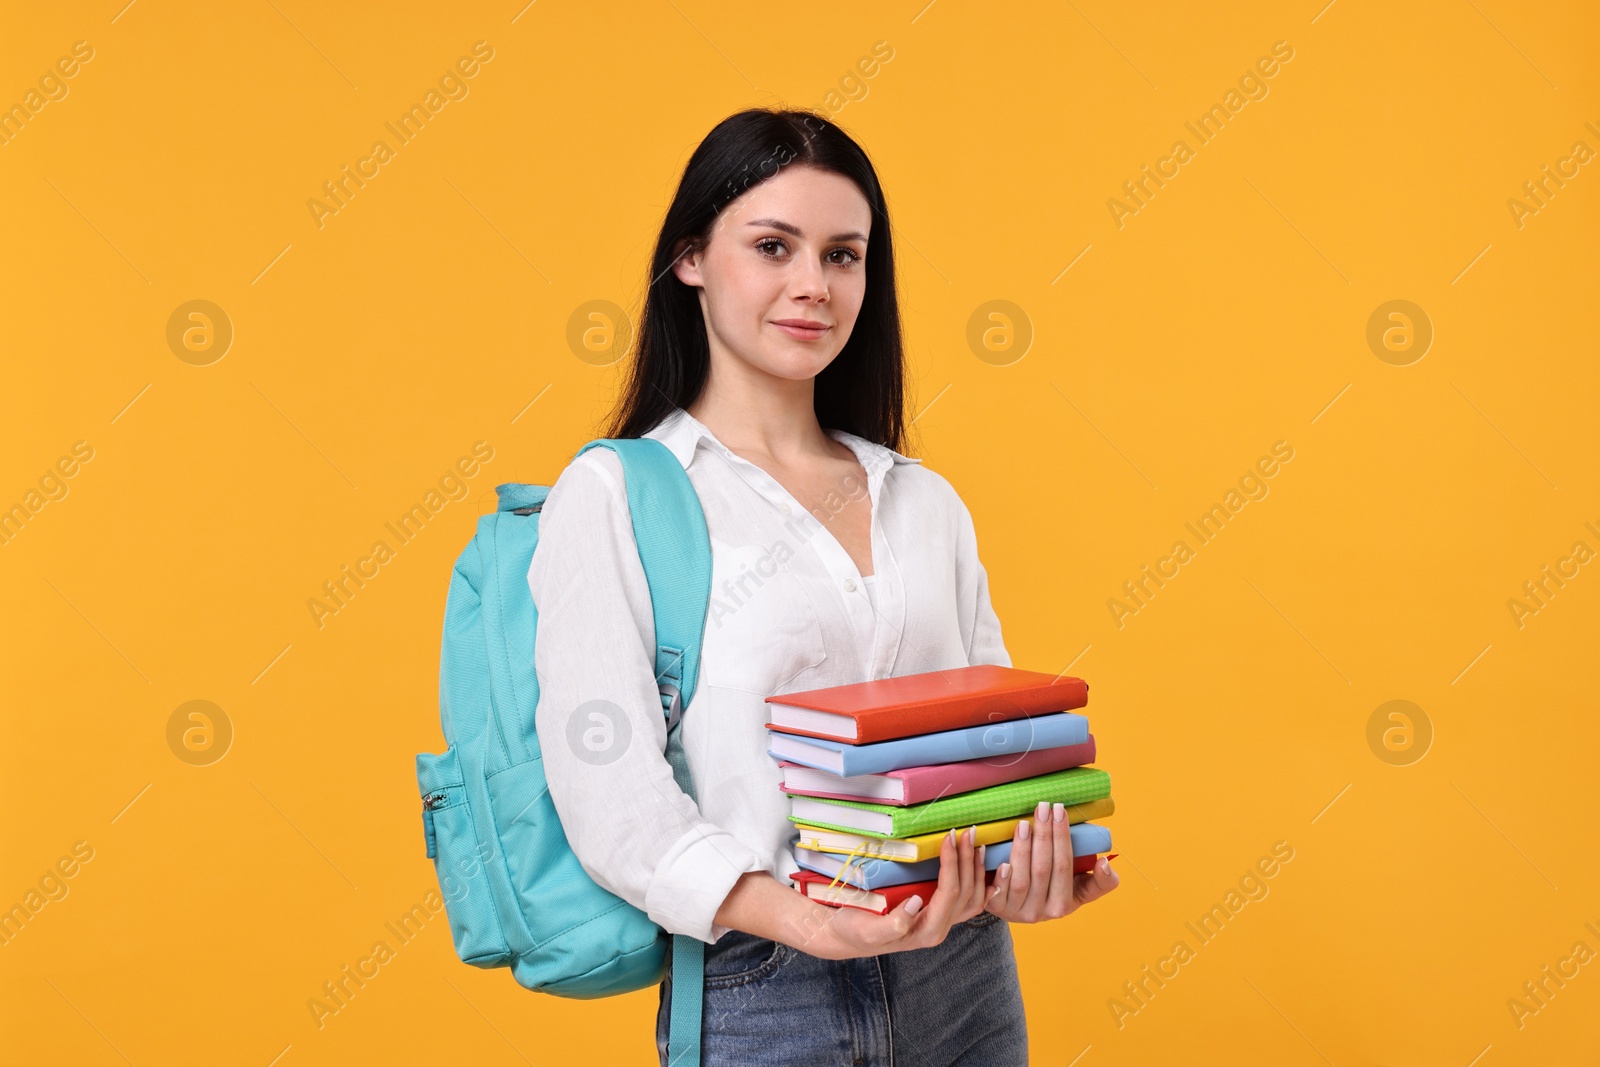 Photo of Student with stack of books on yellow background